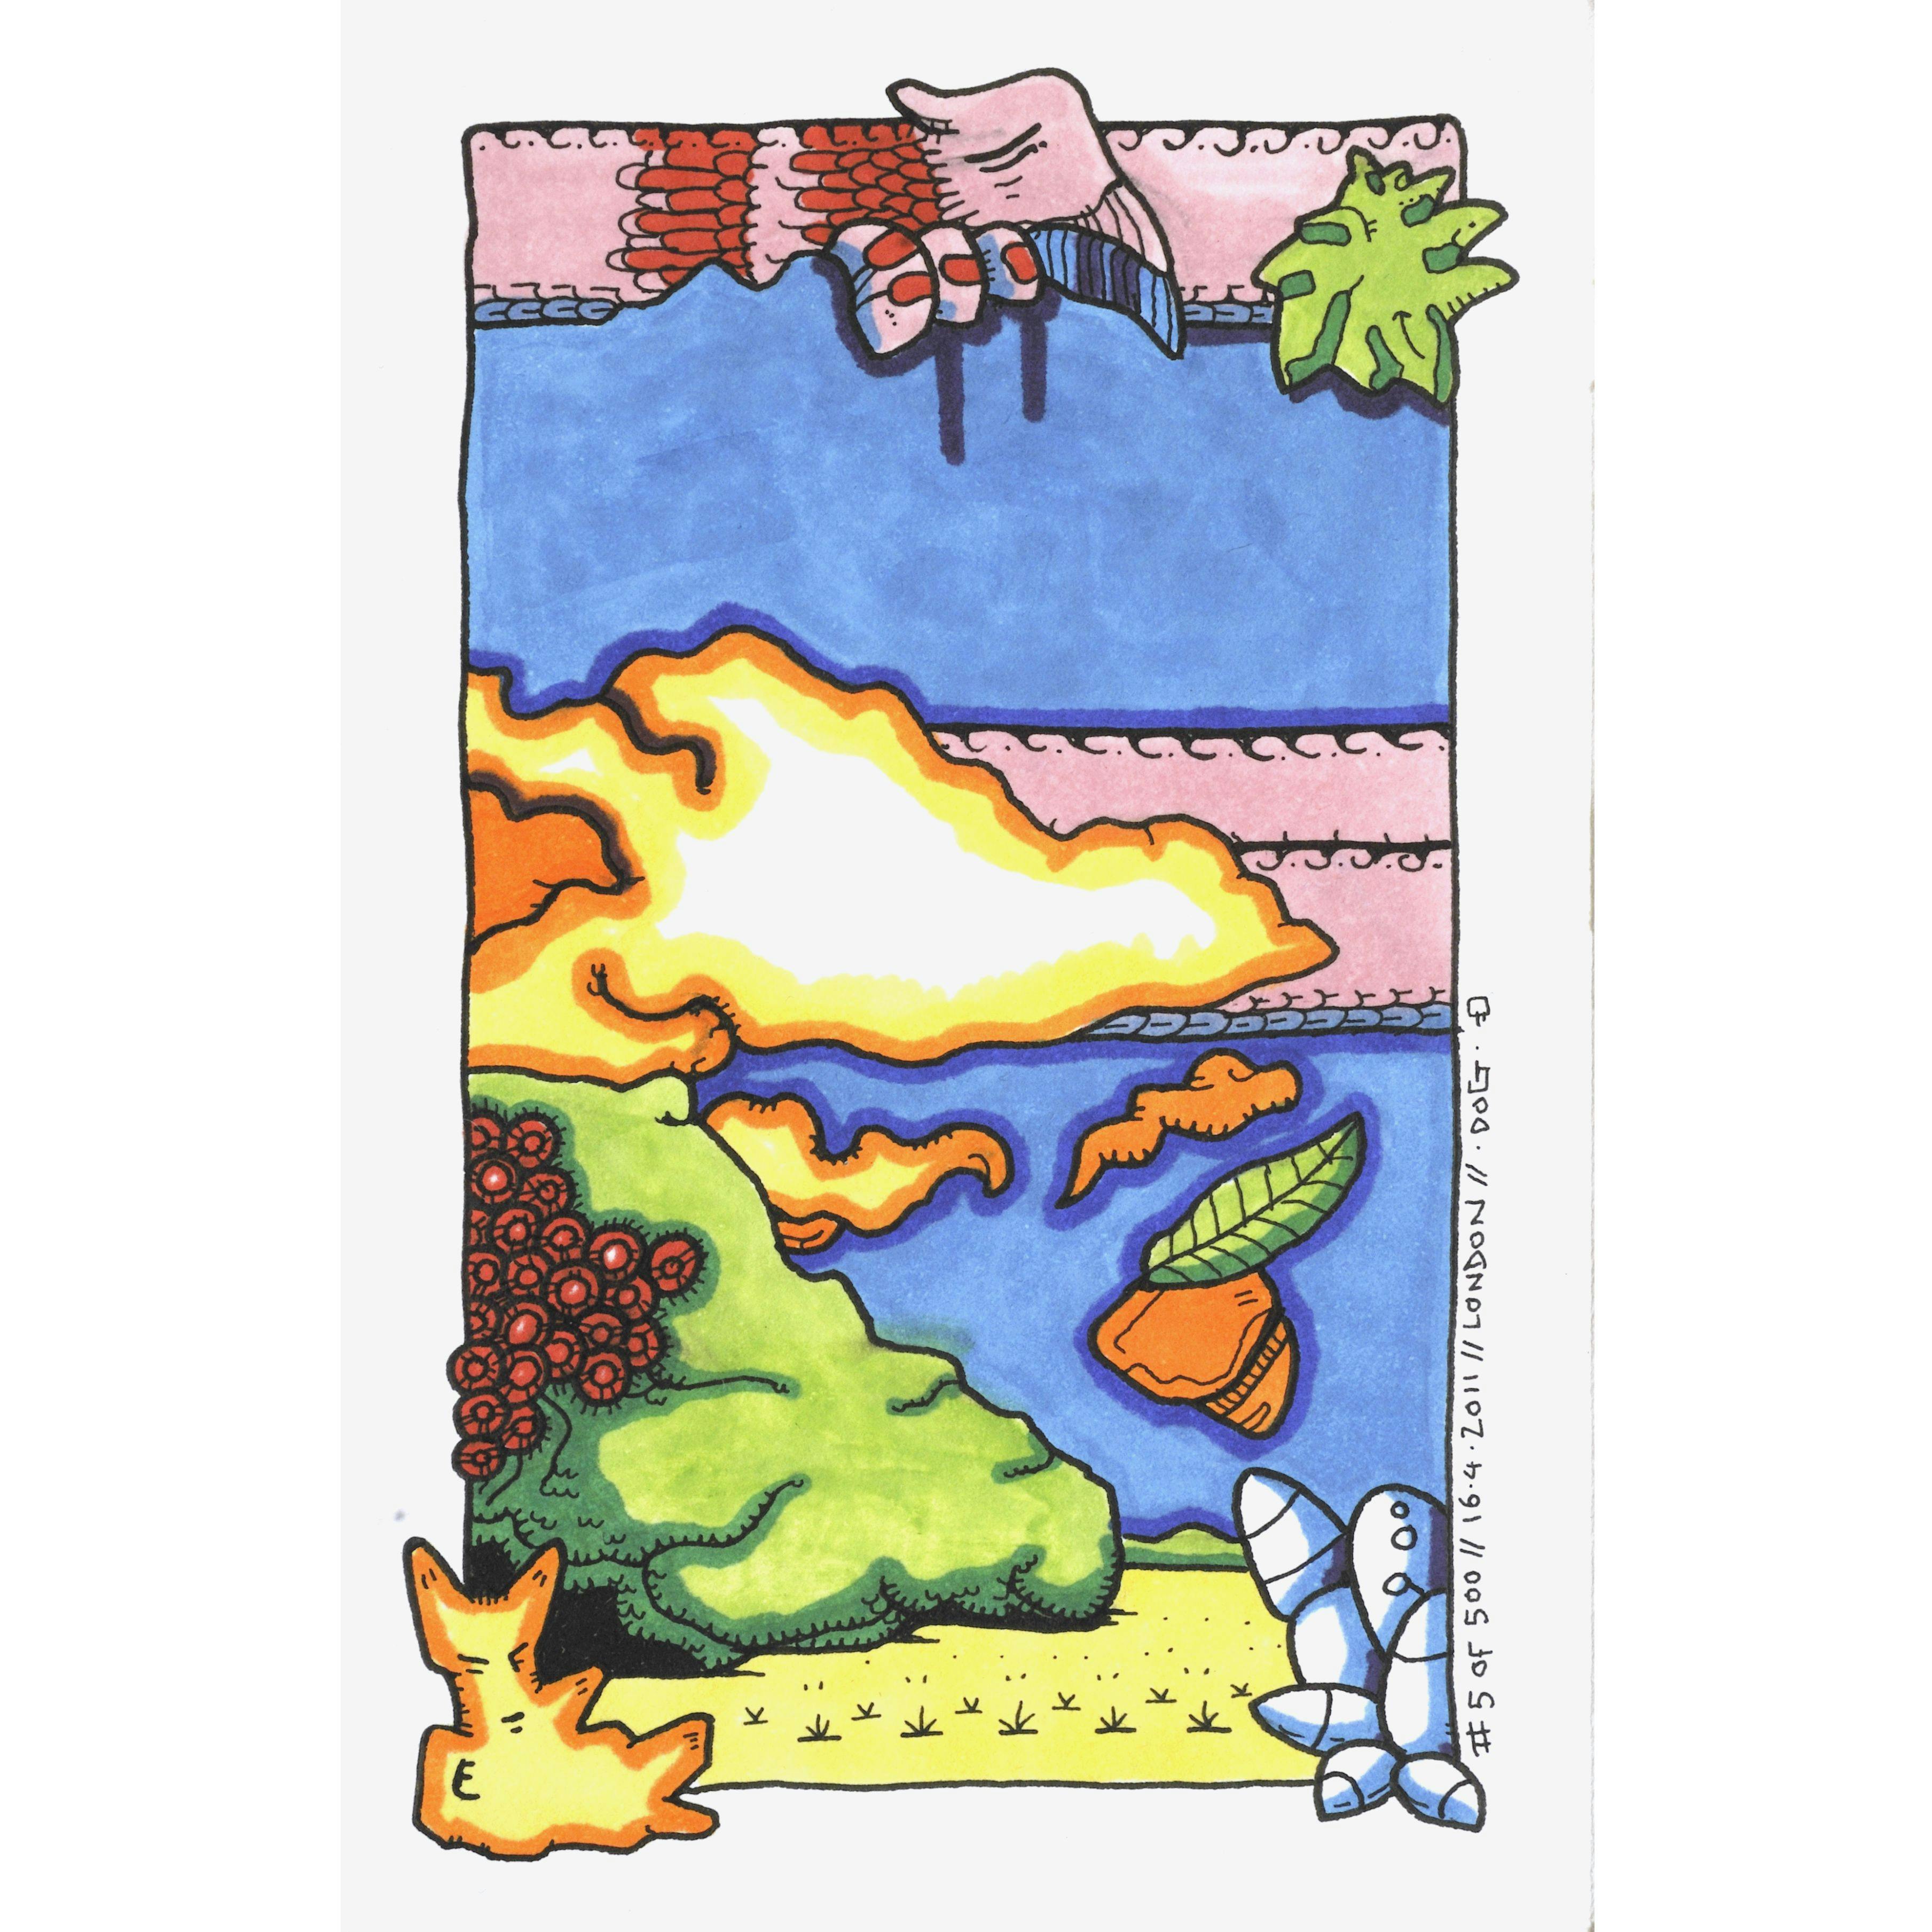 Another Touchdown Rodwell image. It features a long pink, red and blue dragon, white,yellow and orange clouds, bright blue sky, a yellow field and green bushes.